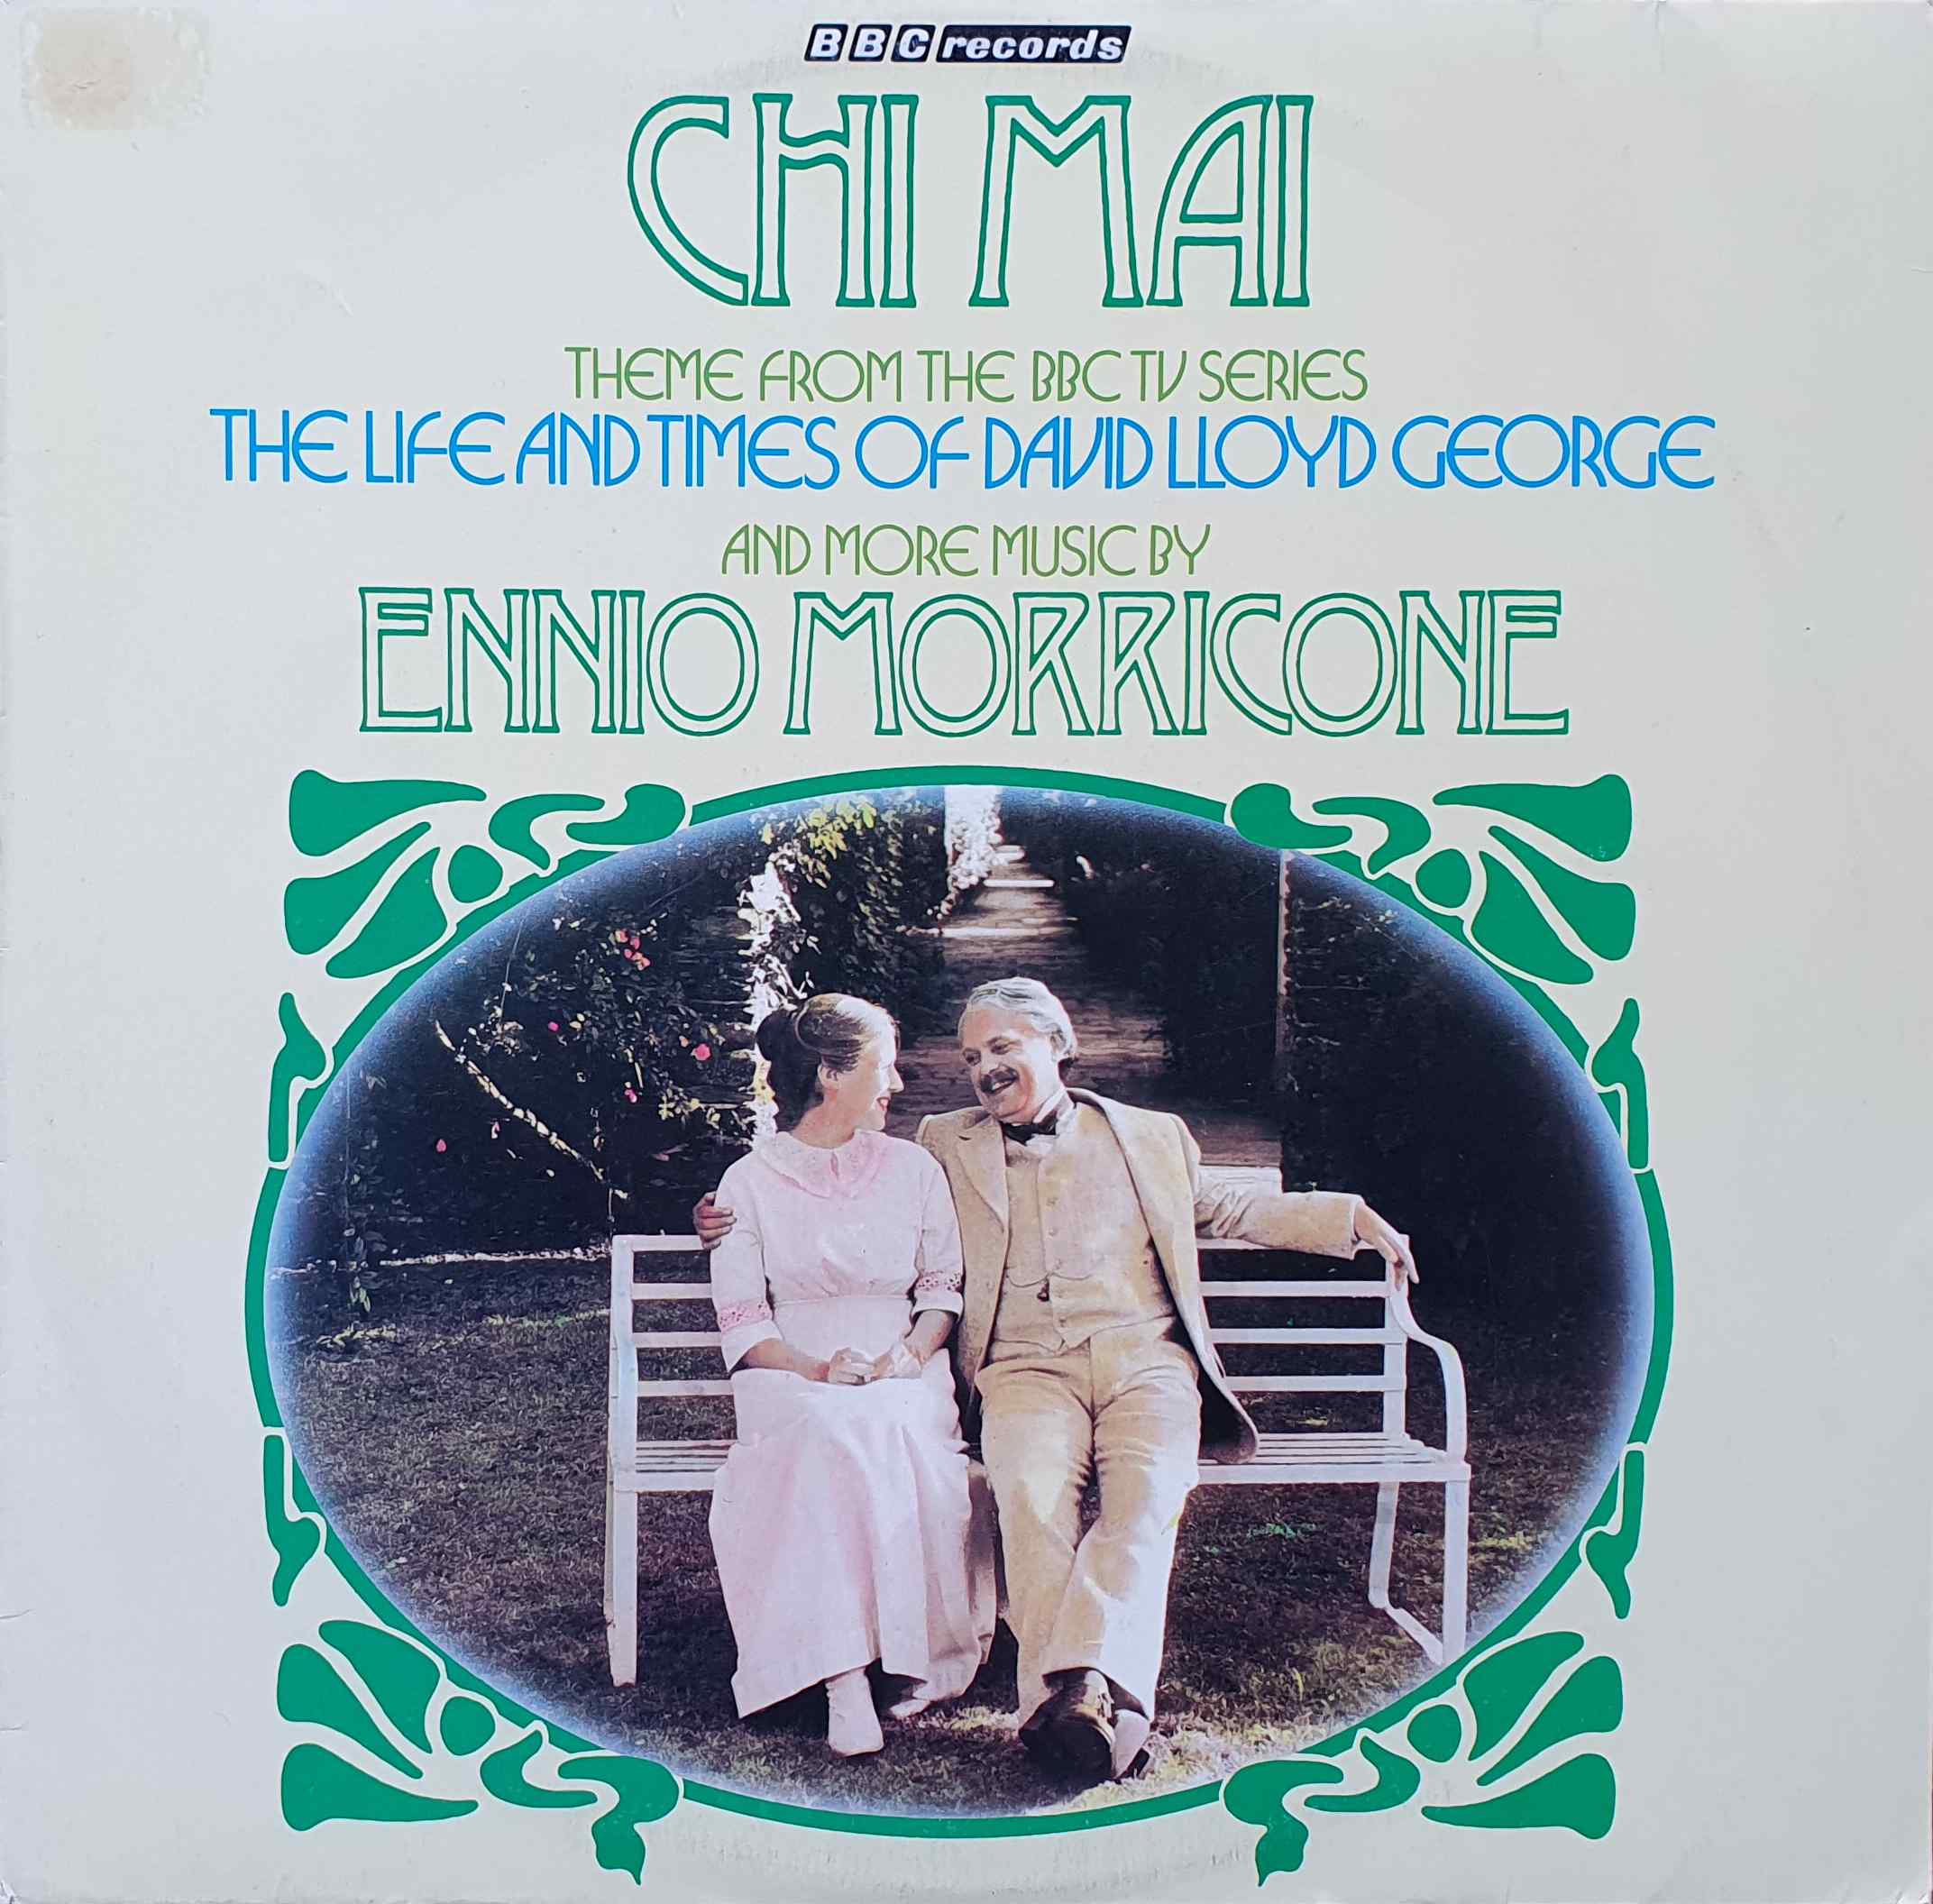 Picture of 2964 069 Chi Mai by artist Ennio Morricone from the BBC albums - Records and Tapes library